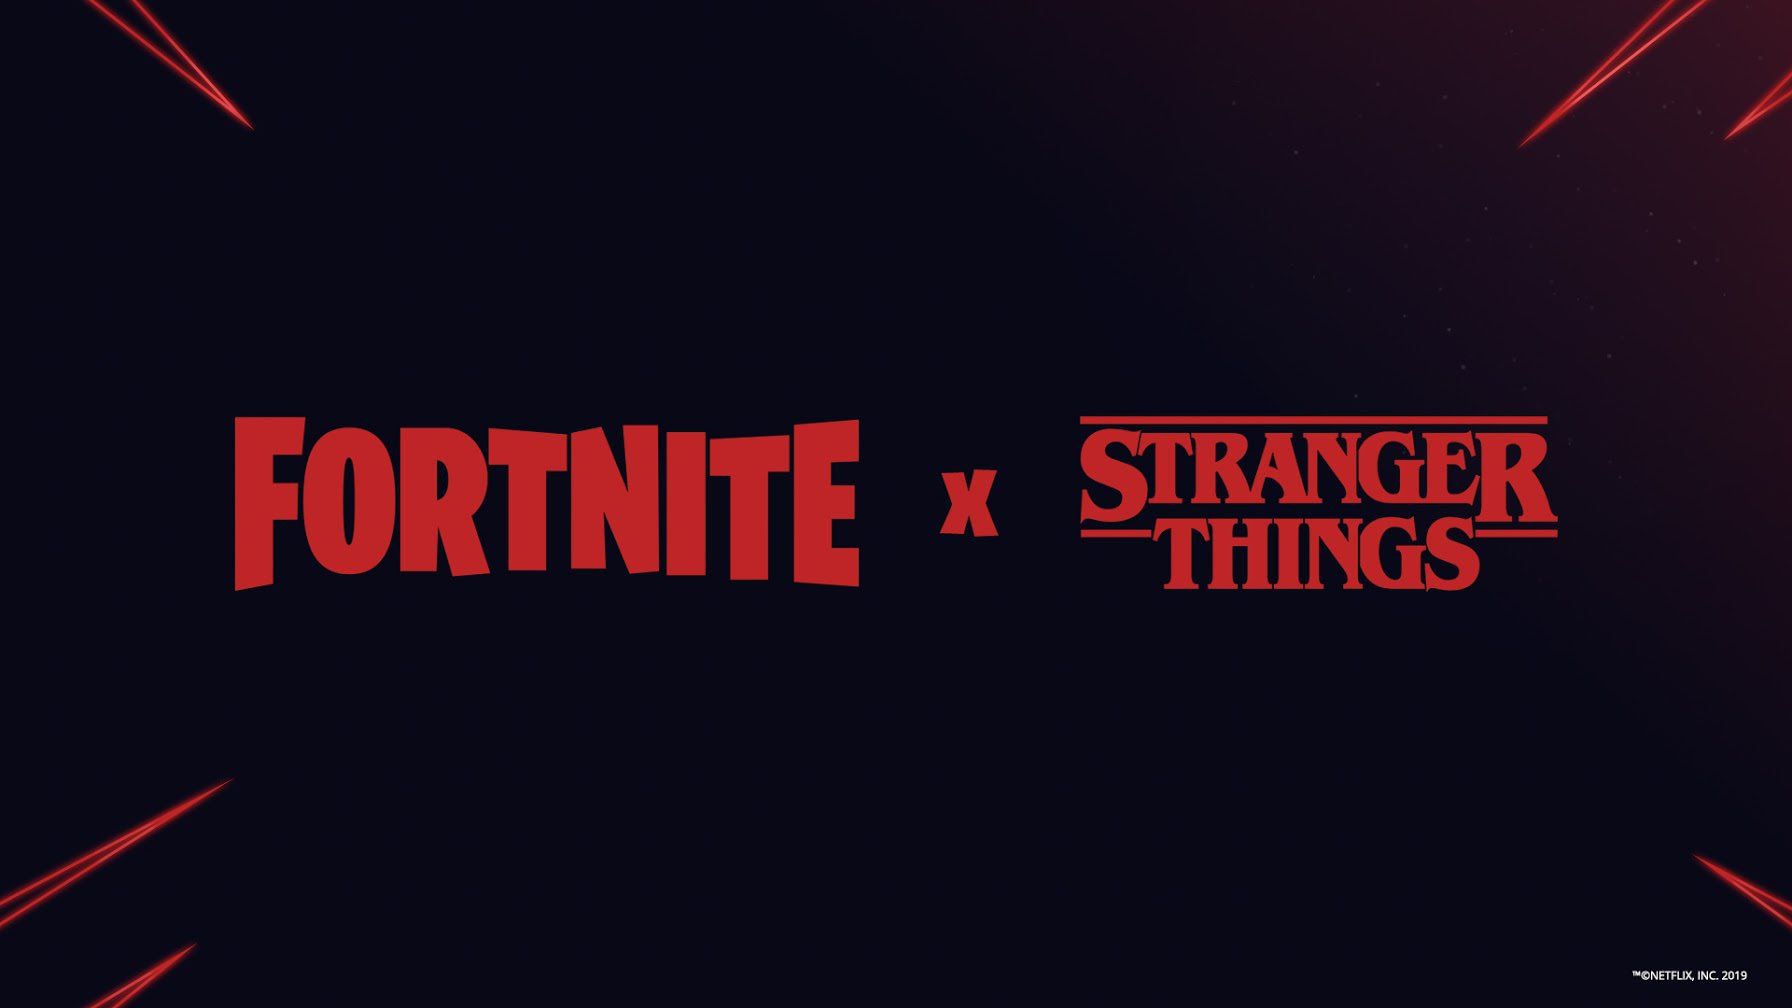 Fortnite x Stranger Things Officially Announced by Epic Games